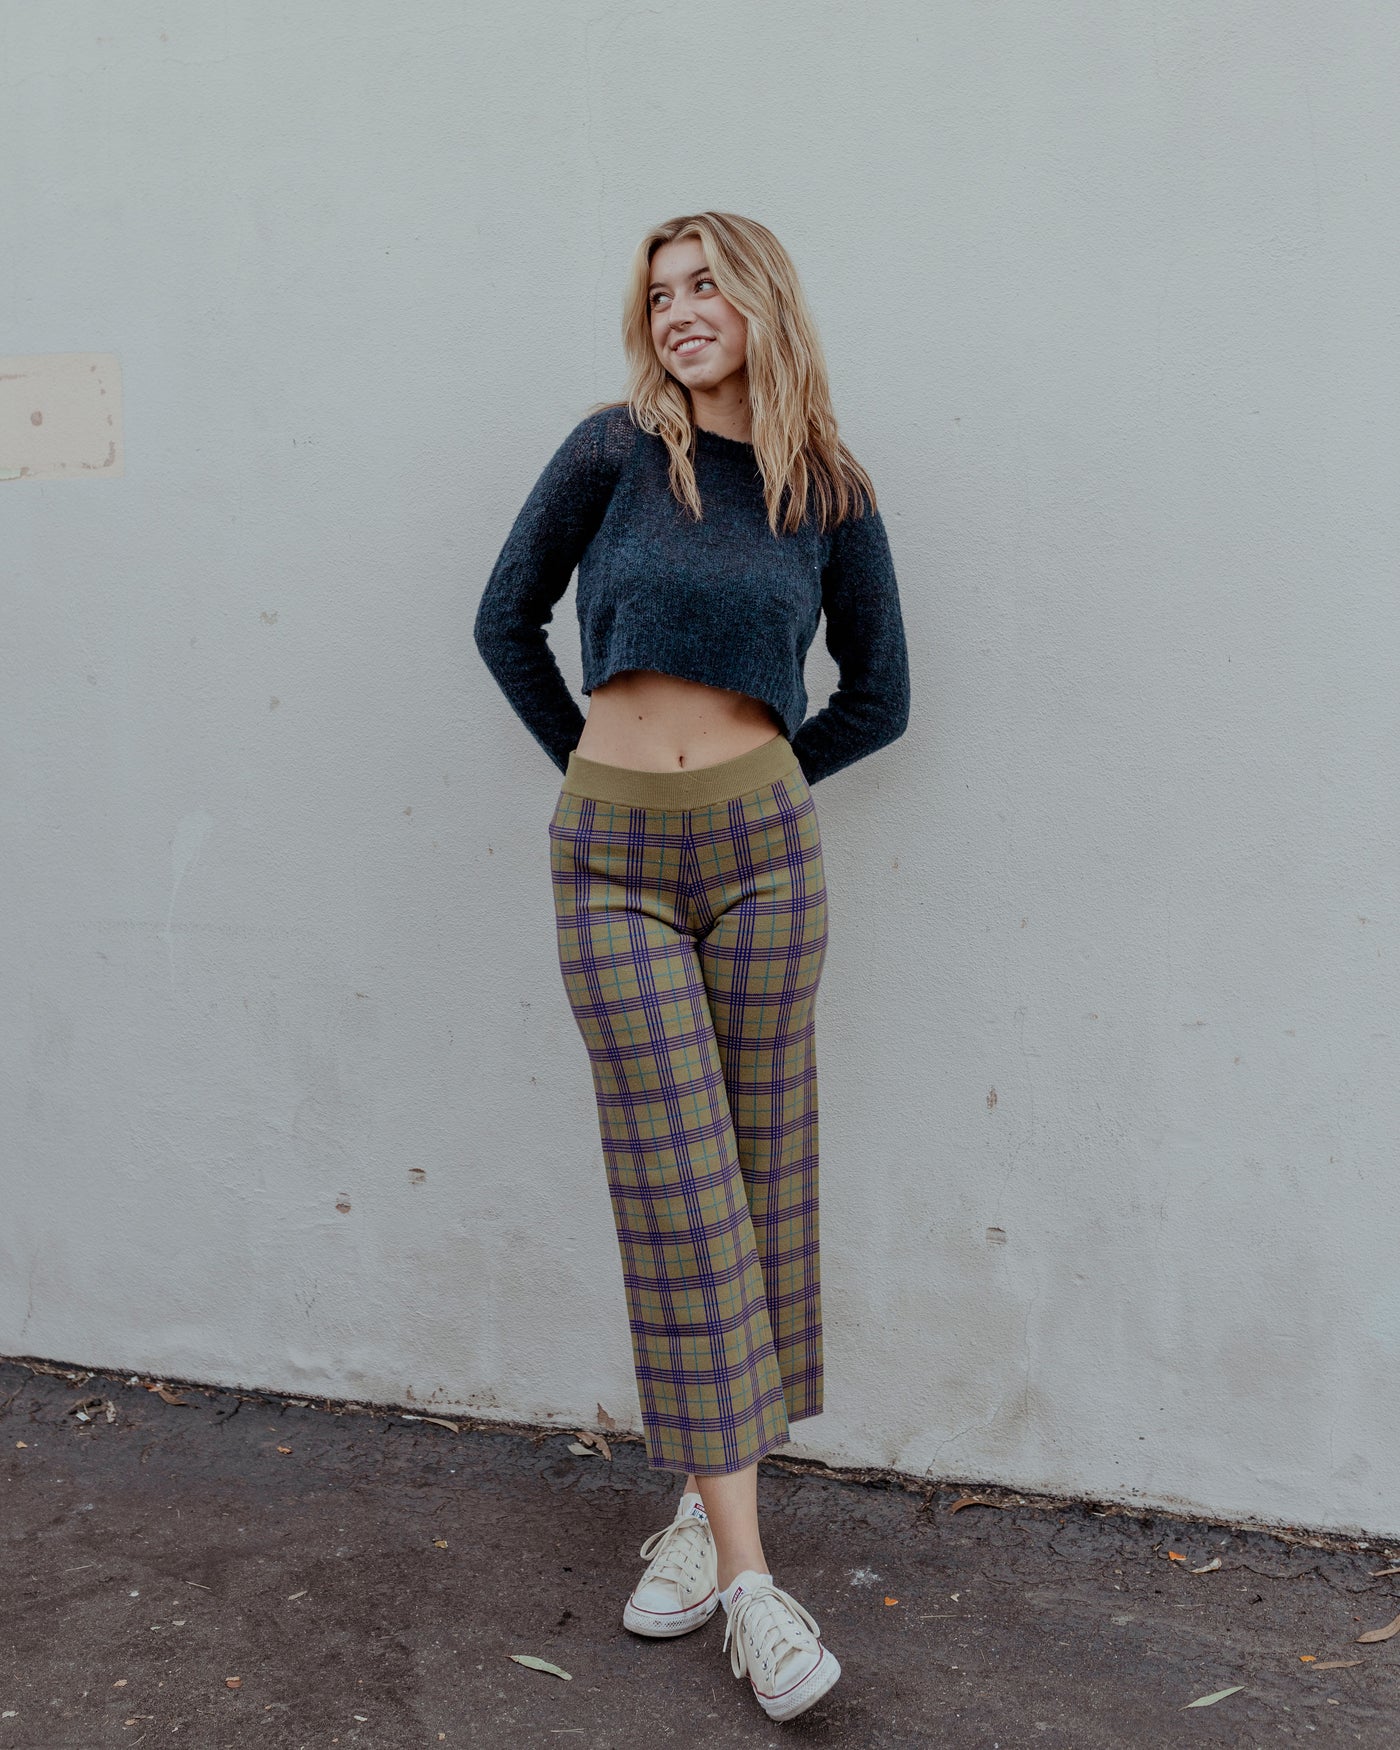 OLIVE PLAID PANT by Daydreamer